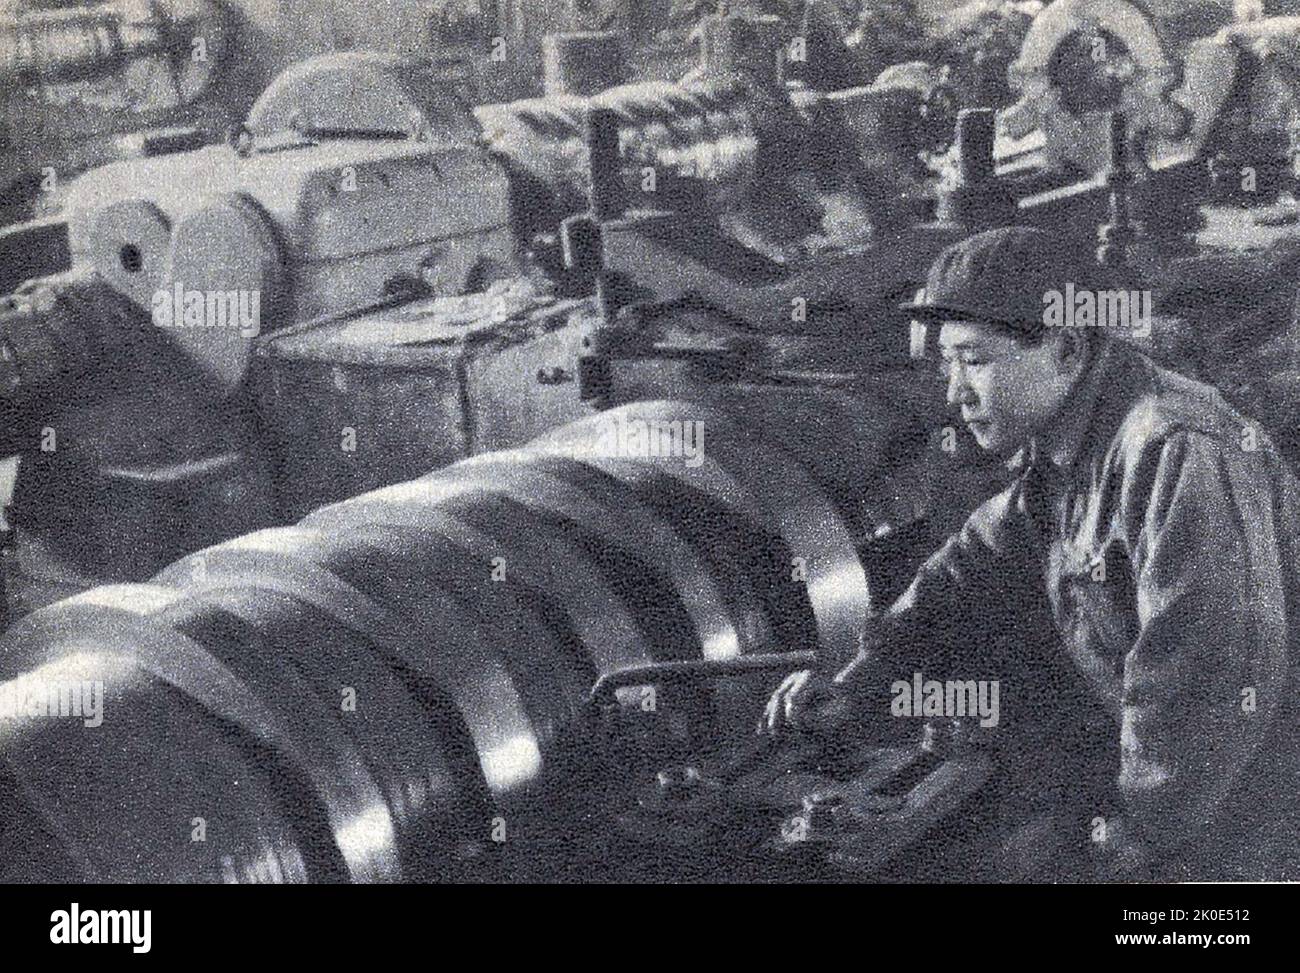 Gapti Jegapso machine tool workplace for the production of accessories and parts. North Korea 1962. Stock Photo